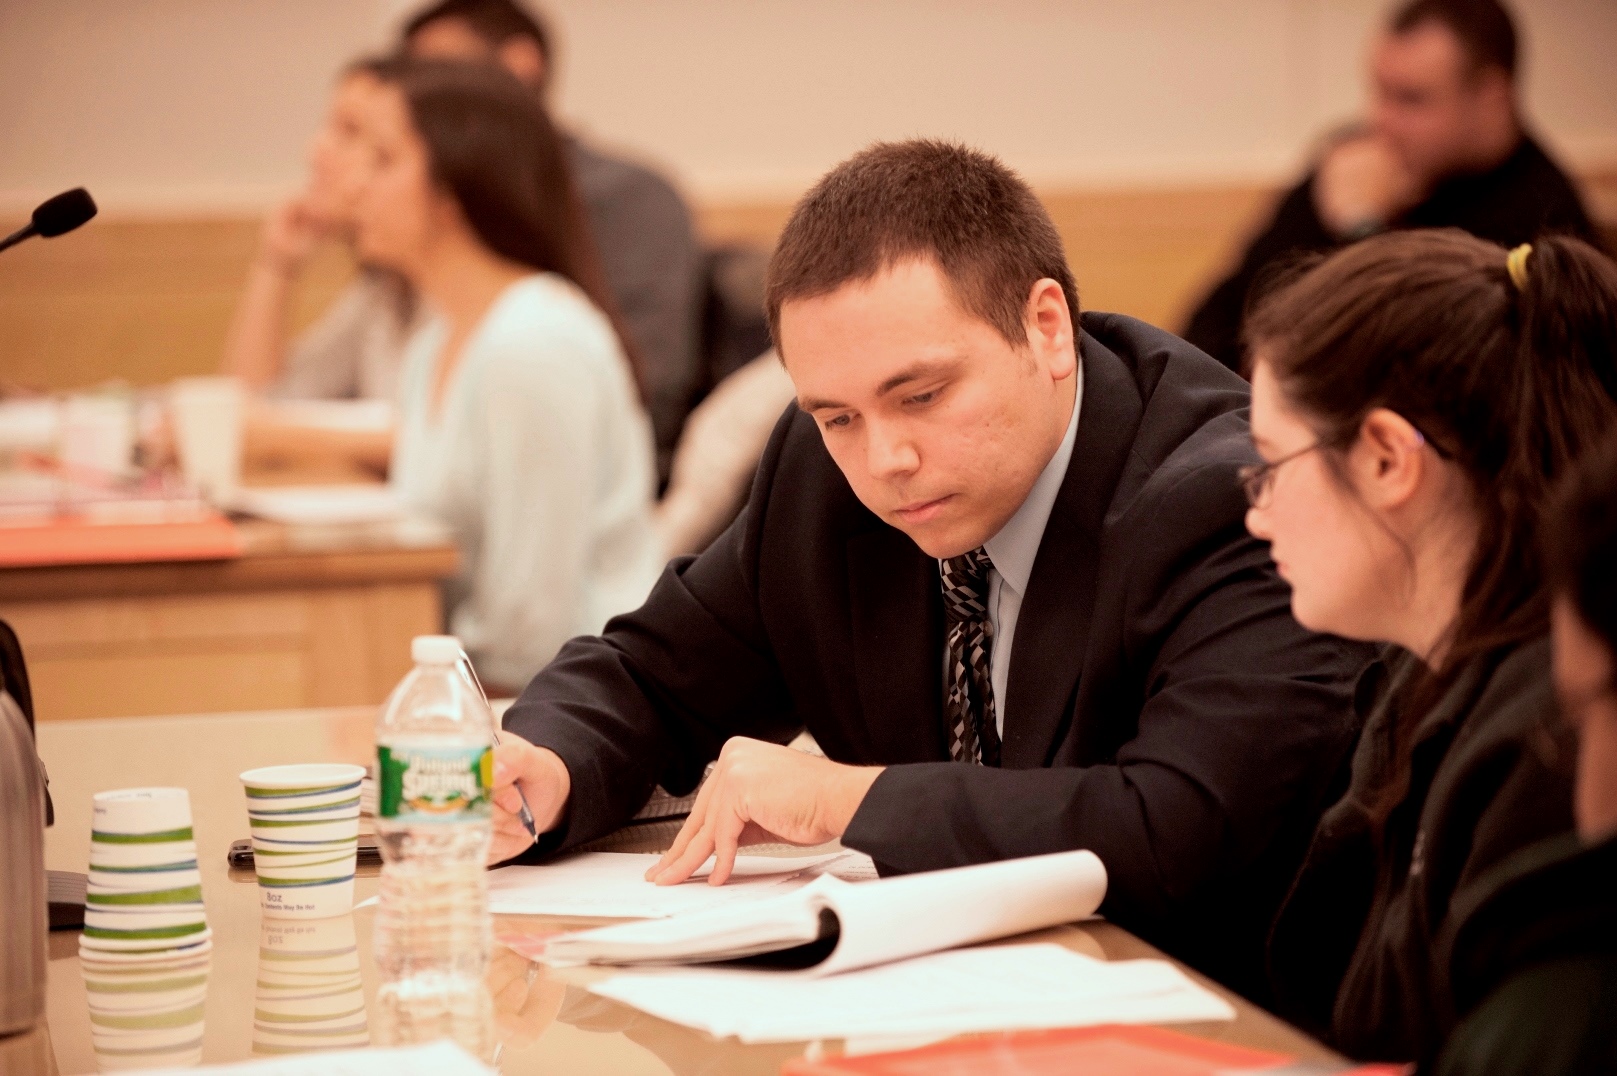 By working together, Husson University and the University of Maine School of Law hope to produce quality lawyers who can serve the needs of the public, particularly in underserved areas of the state.